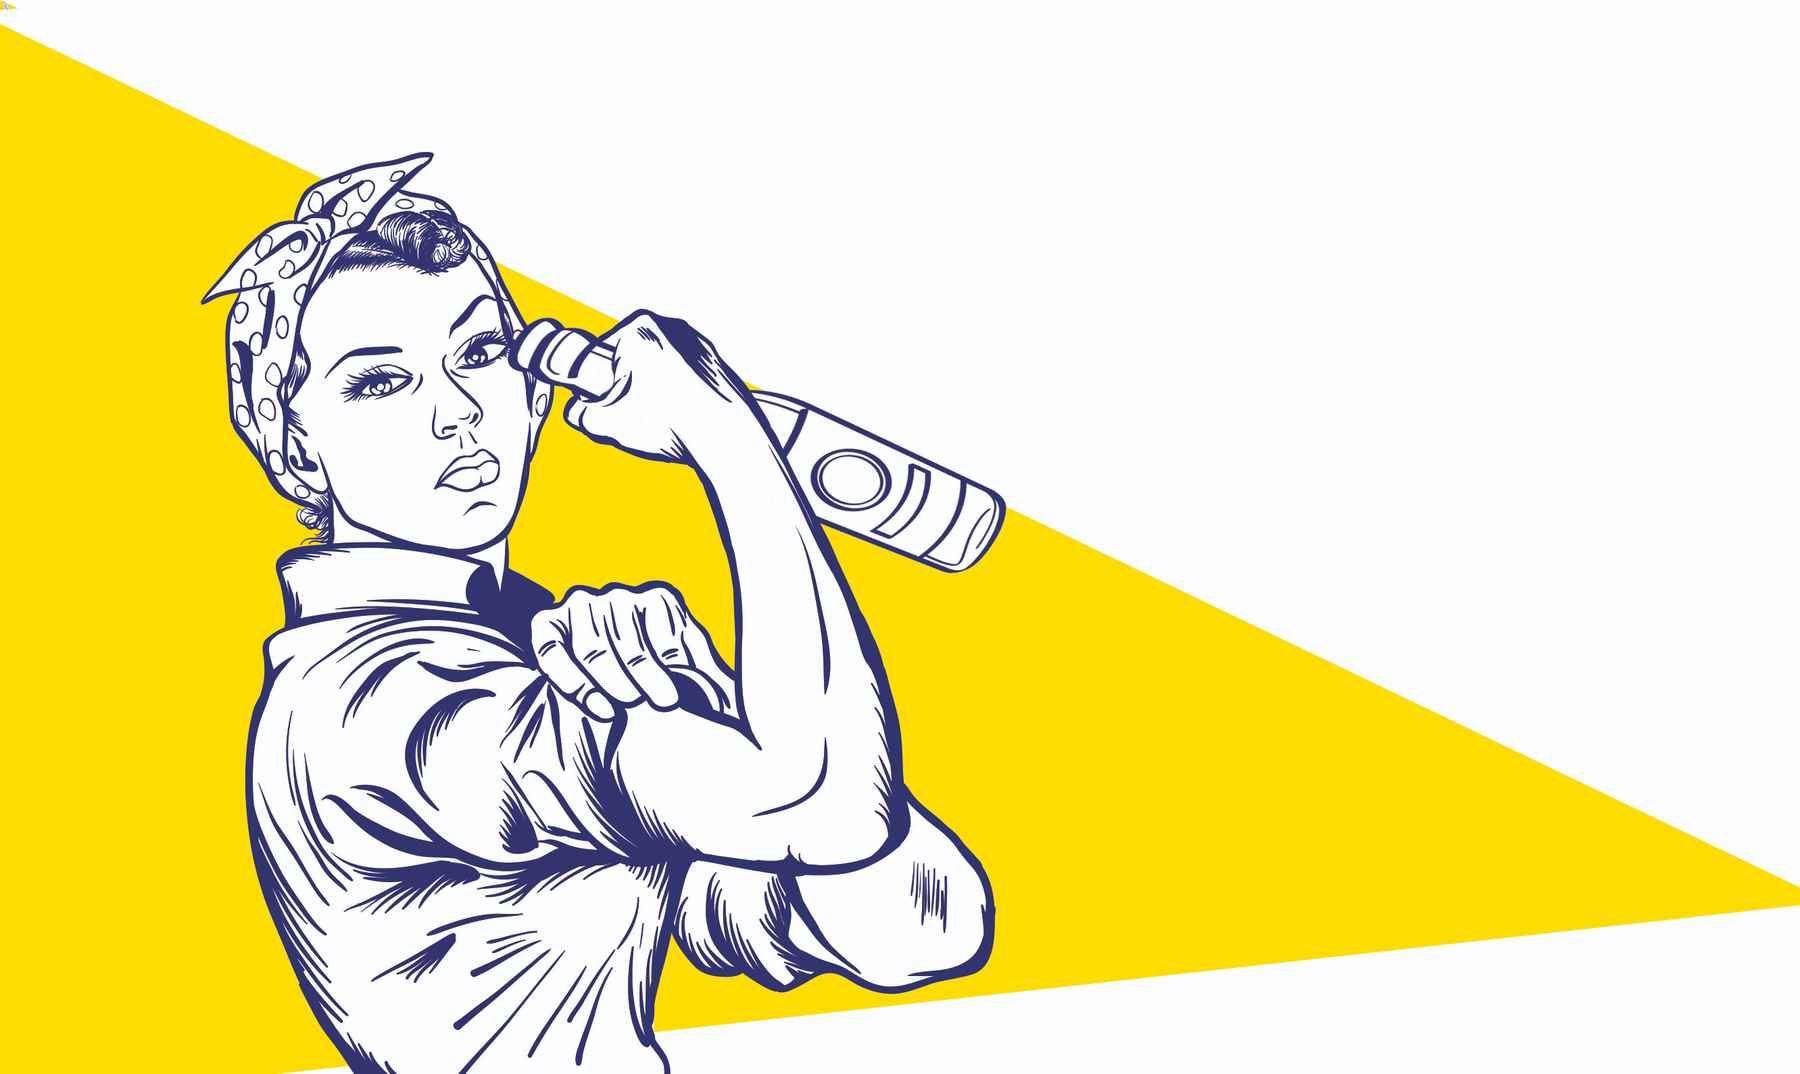 Illustration of woman wearing a bandana in her hair and holding a bottle of beer rolling up her shirt sleeve. Reference to Rosie the Riveter.